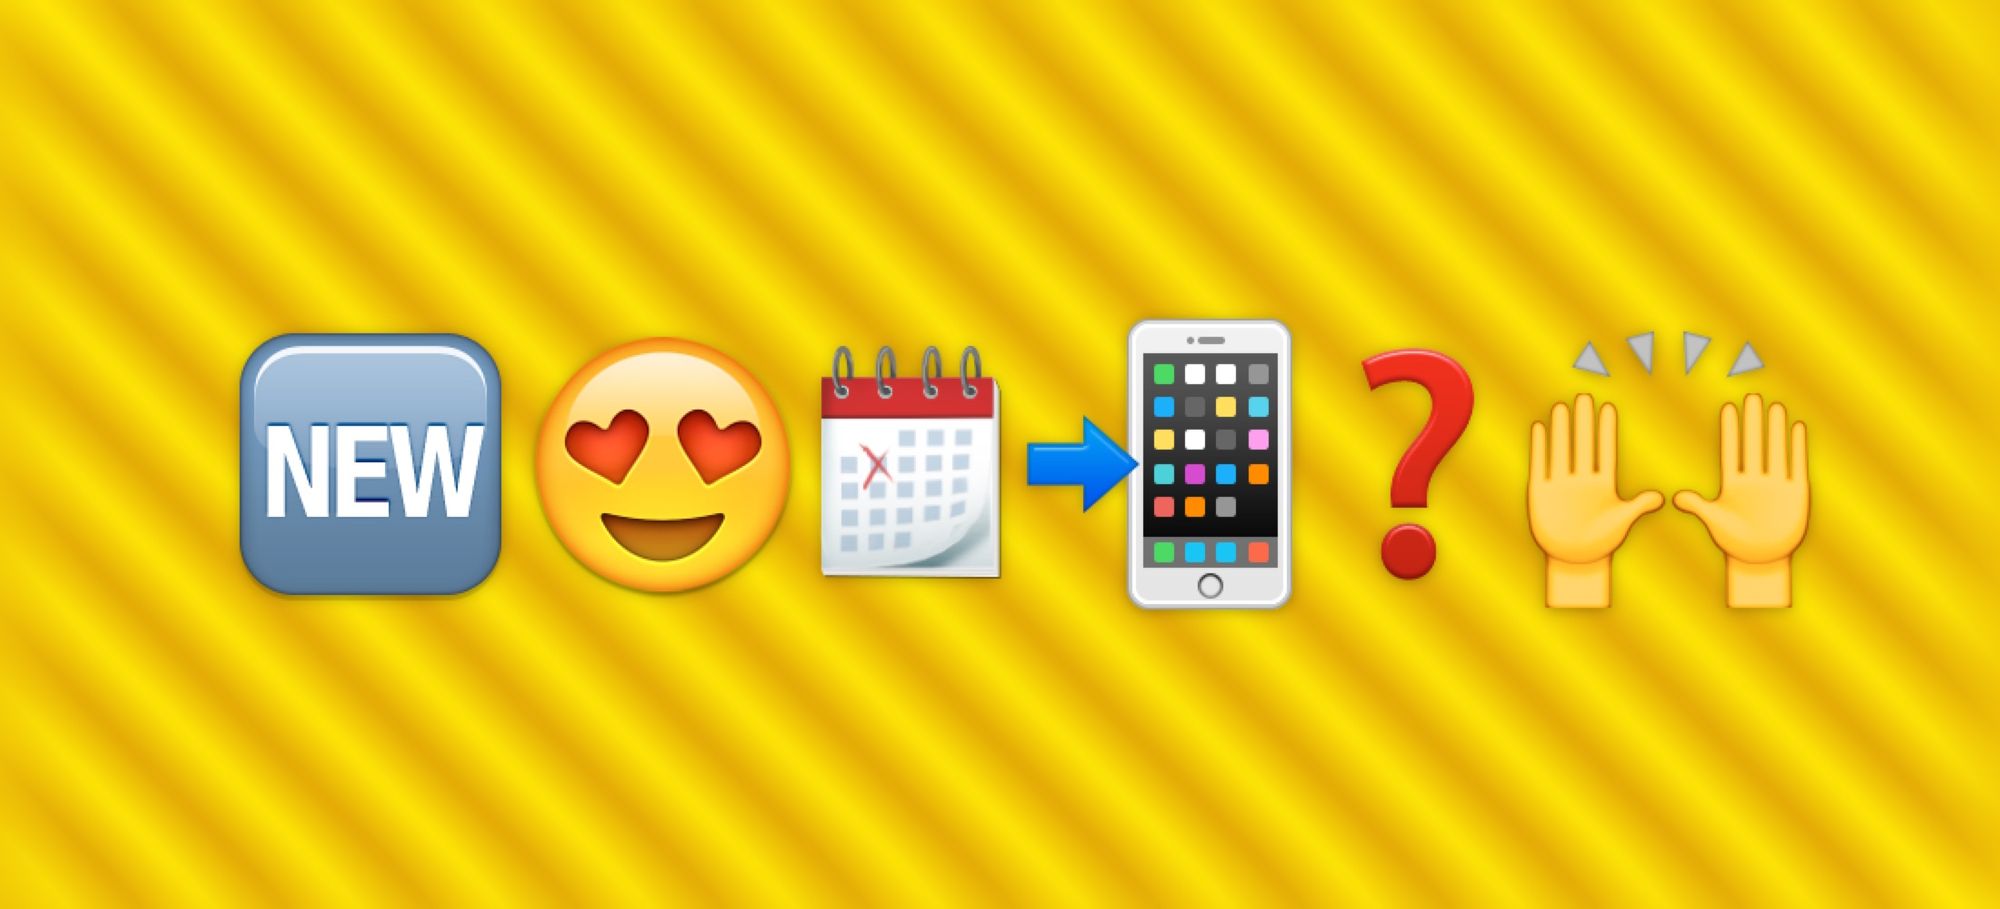 When to expect the new emojis